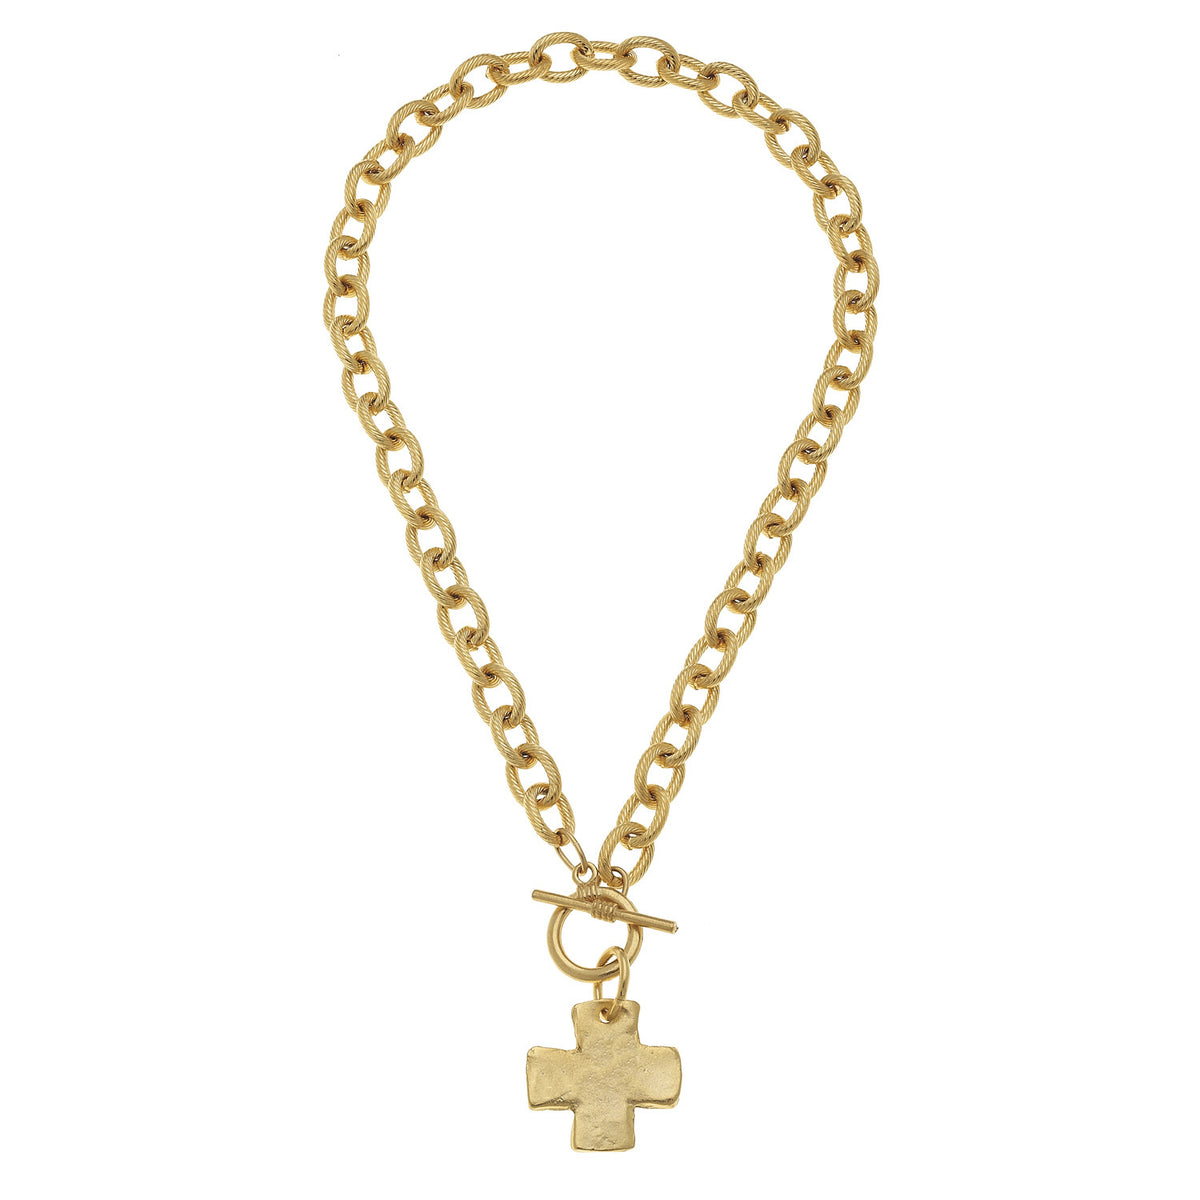 Susan Shaw Cross Chain Toggle Necklace, Gold Plated Pendant